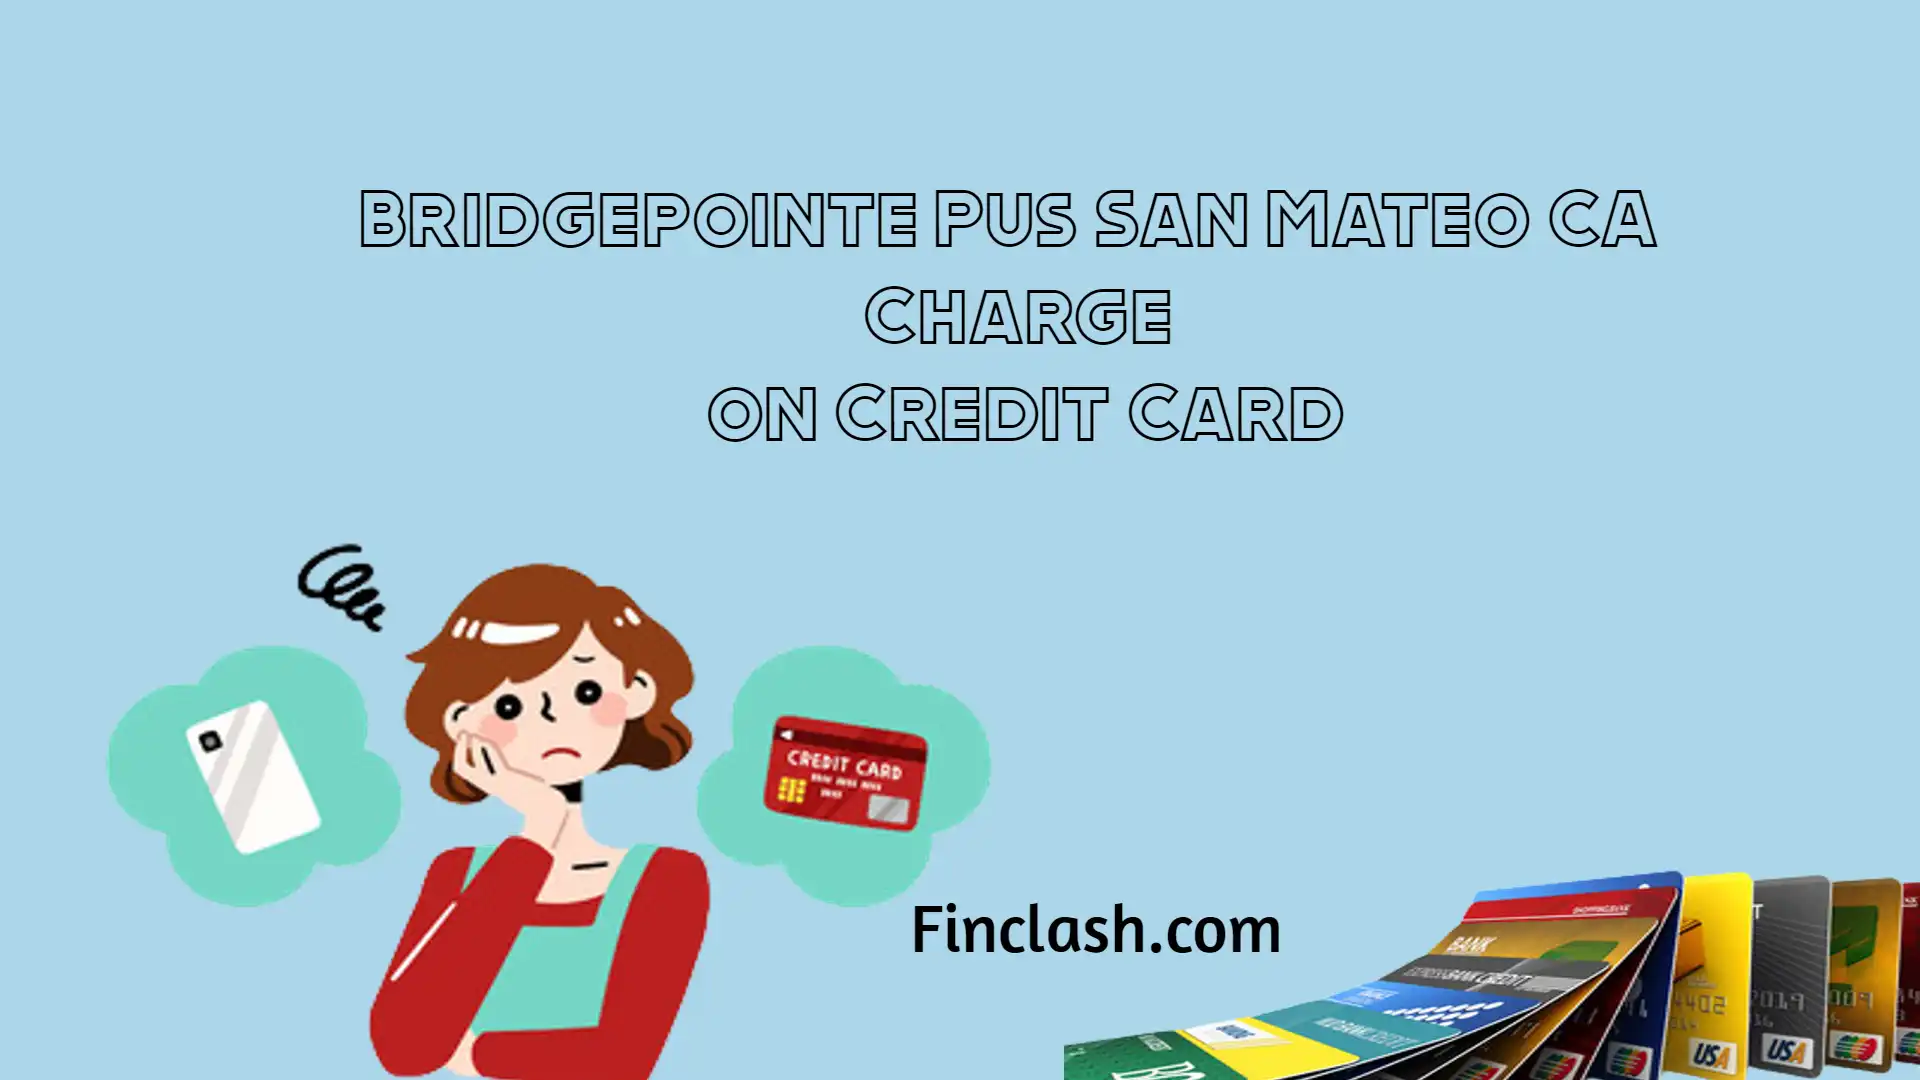 Bridgepointe Pus San Mateo CA Charge on Credit Card – Explained.